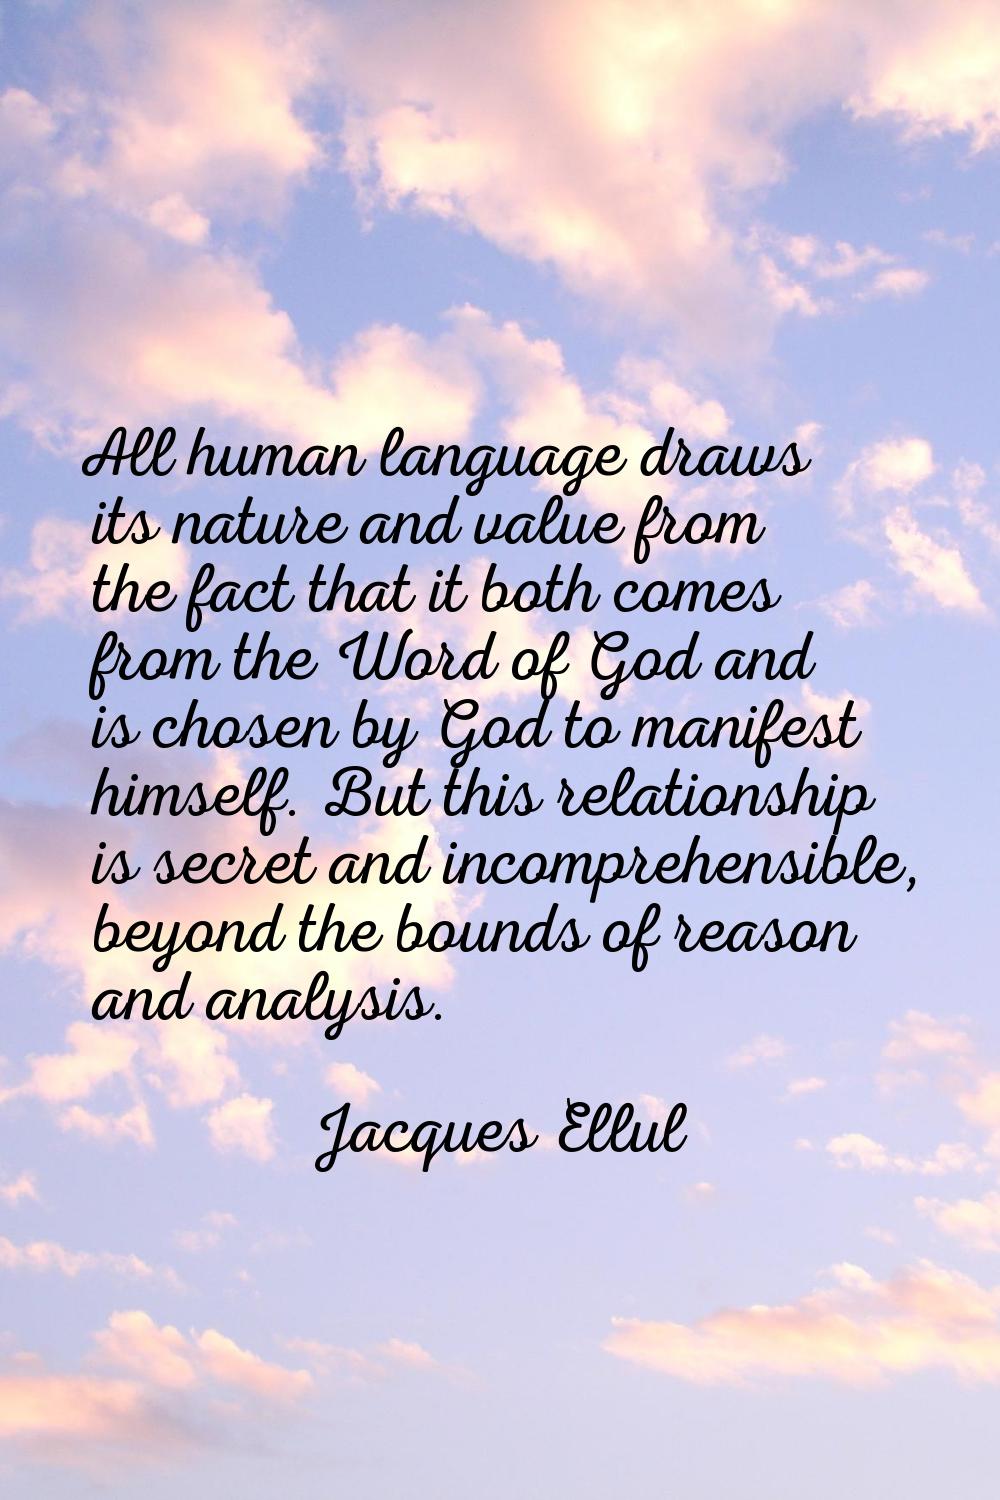 All human language draws its nature and value from the fact that it both comes from the Word of God